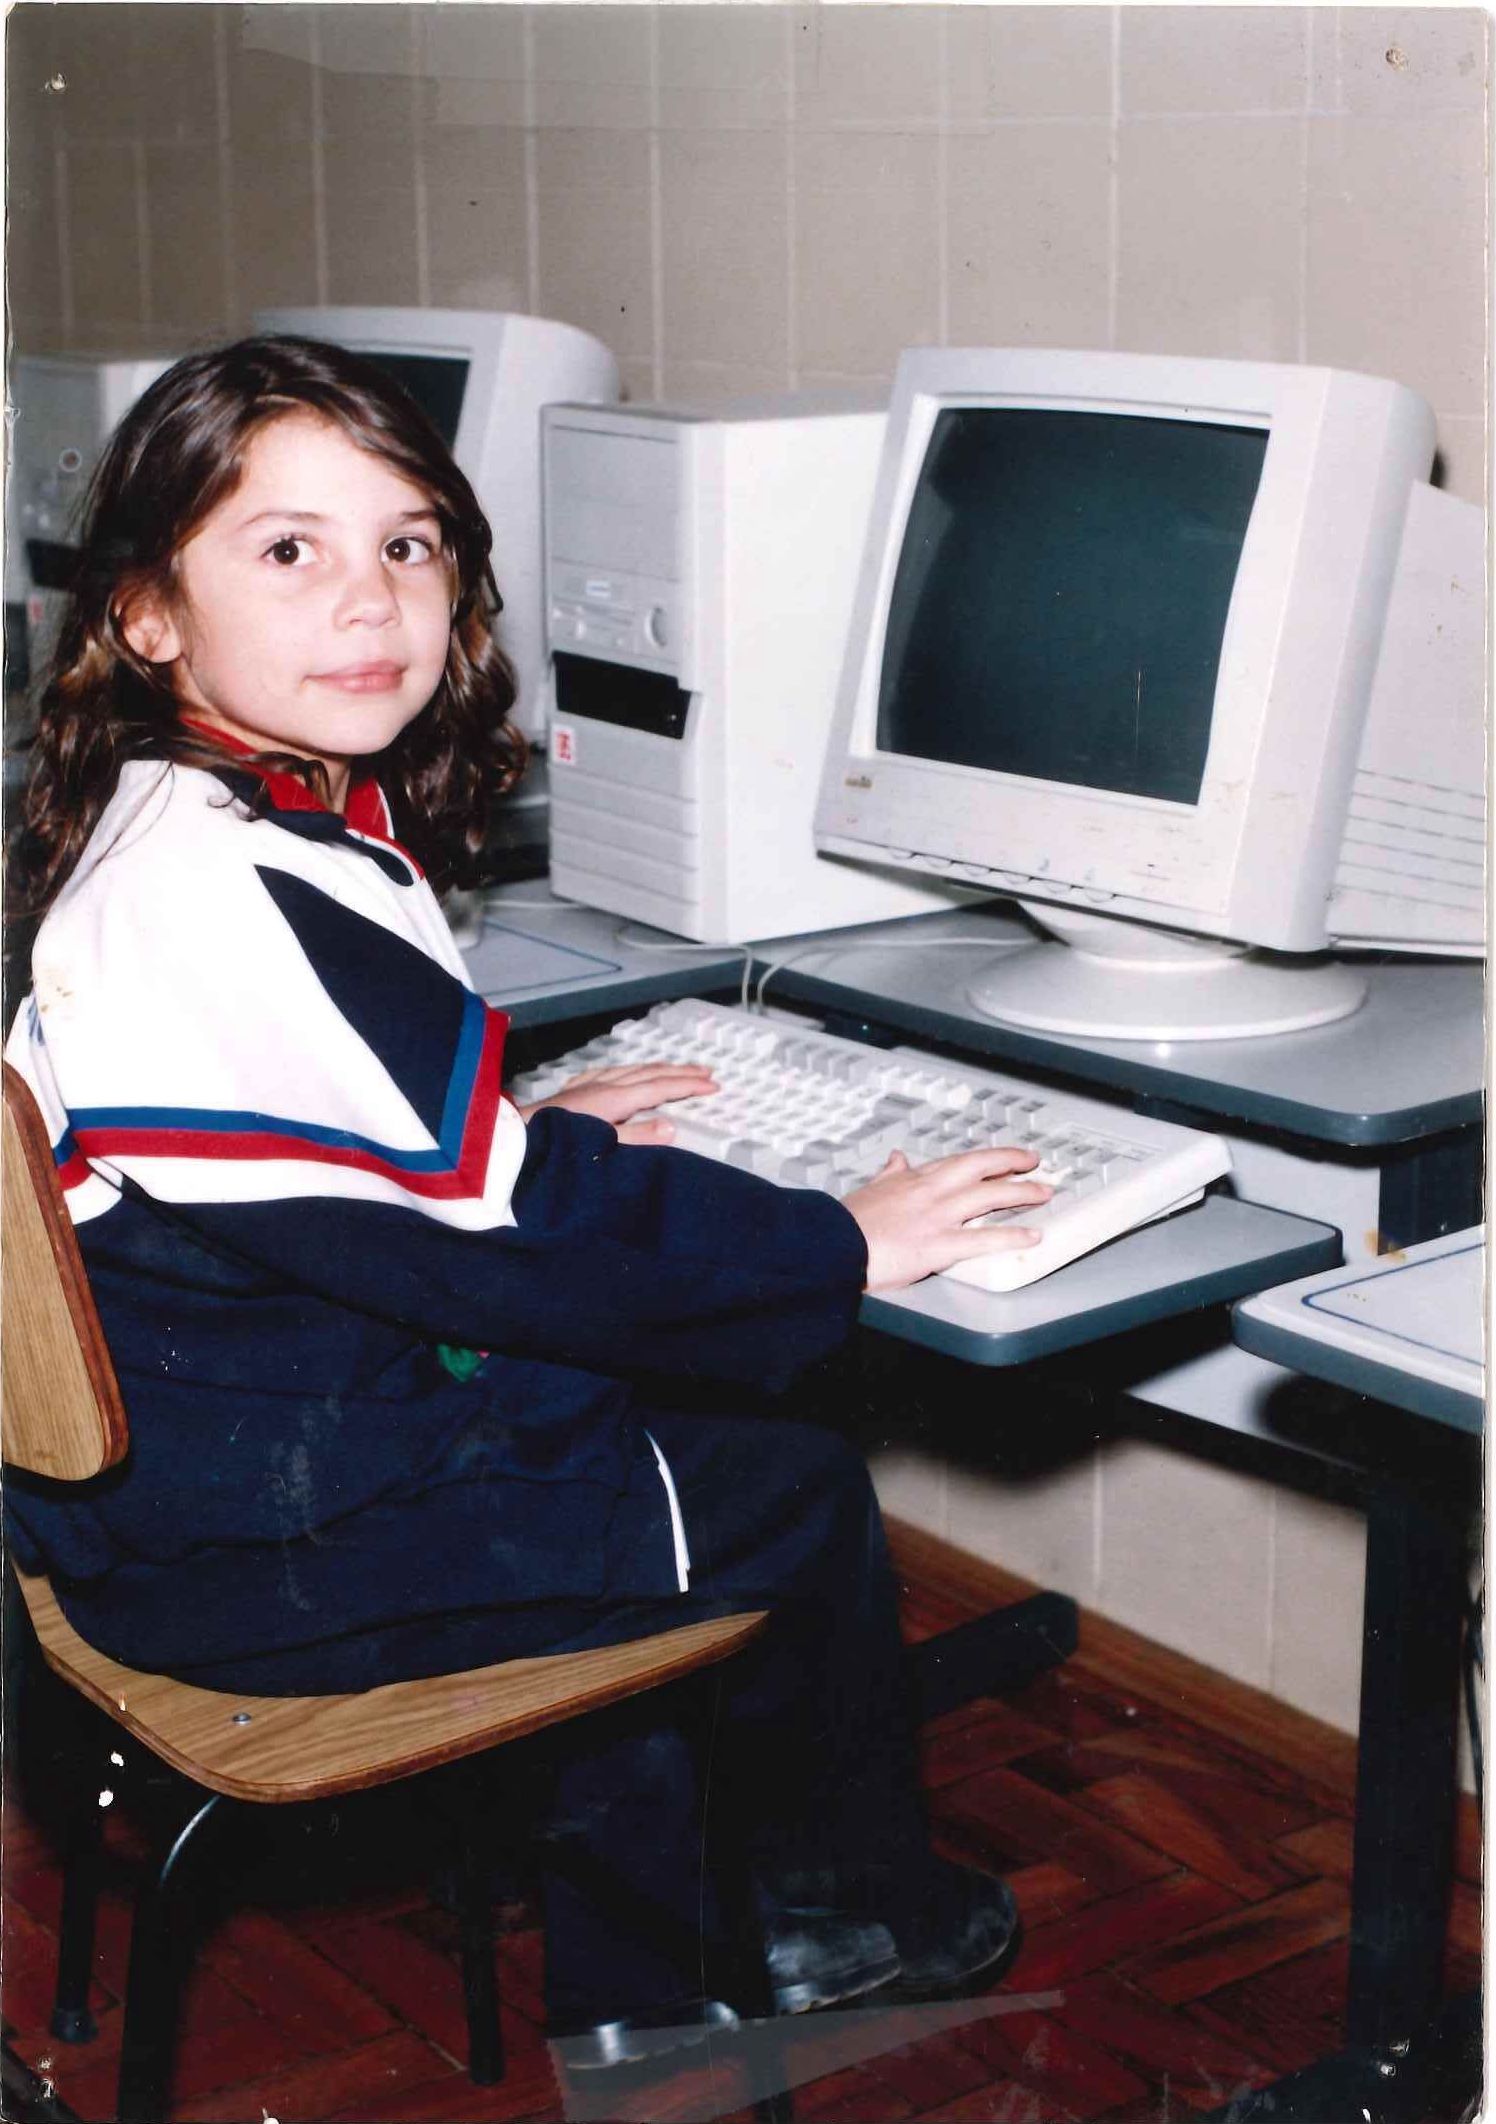 Me when I was 6, sat in front of a PC at my school.